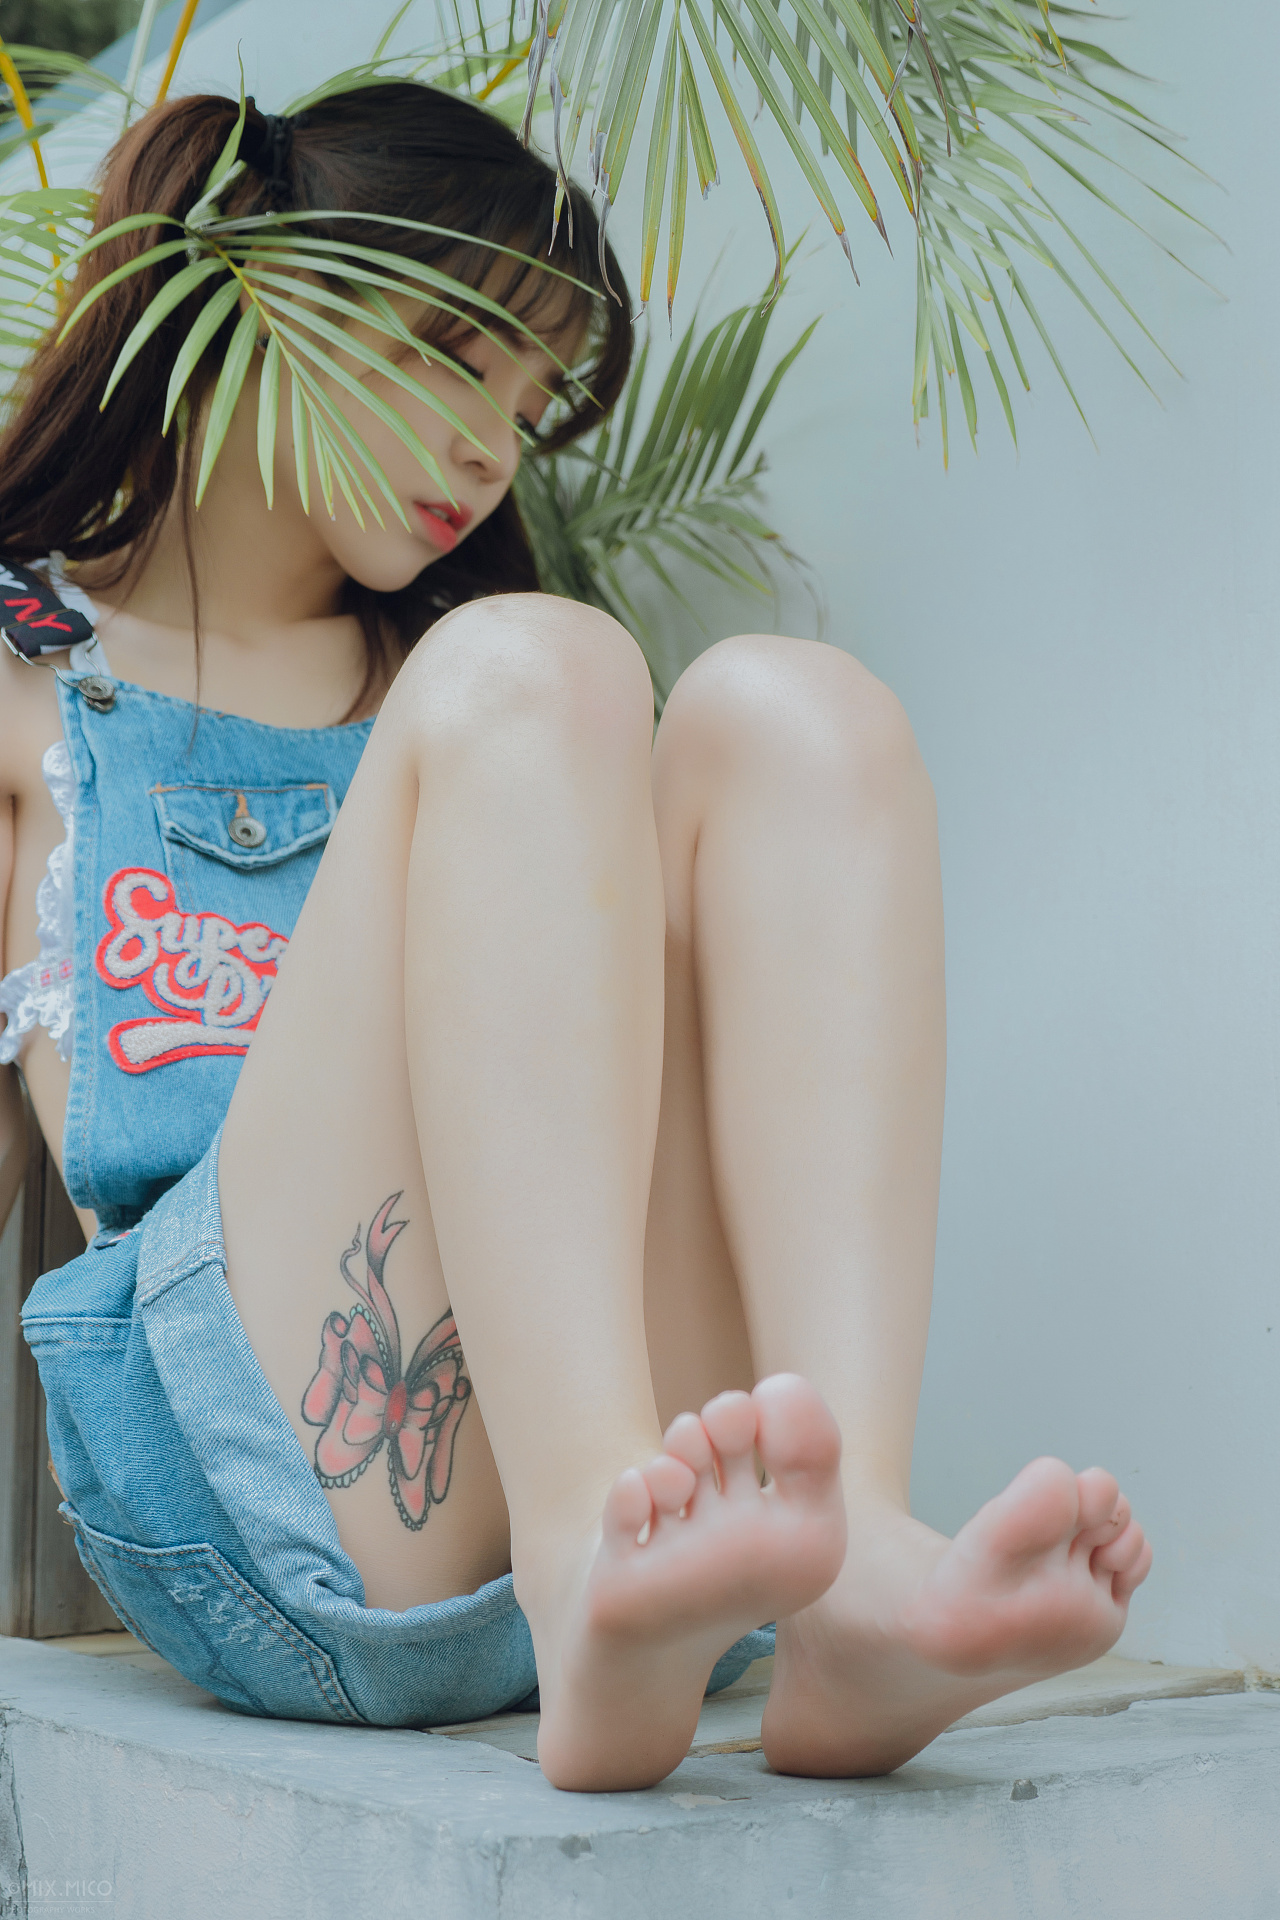 People 1280x1920 Chinese model model Asian women feet tattoo barefoot toes legs brunette twintails pale sitting